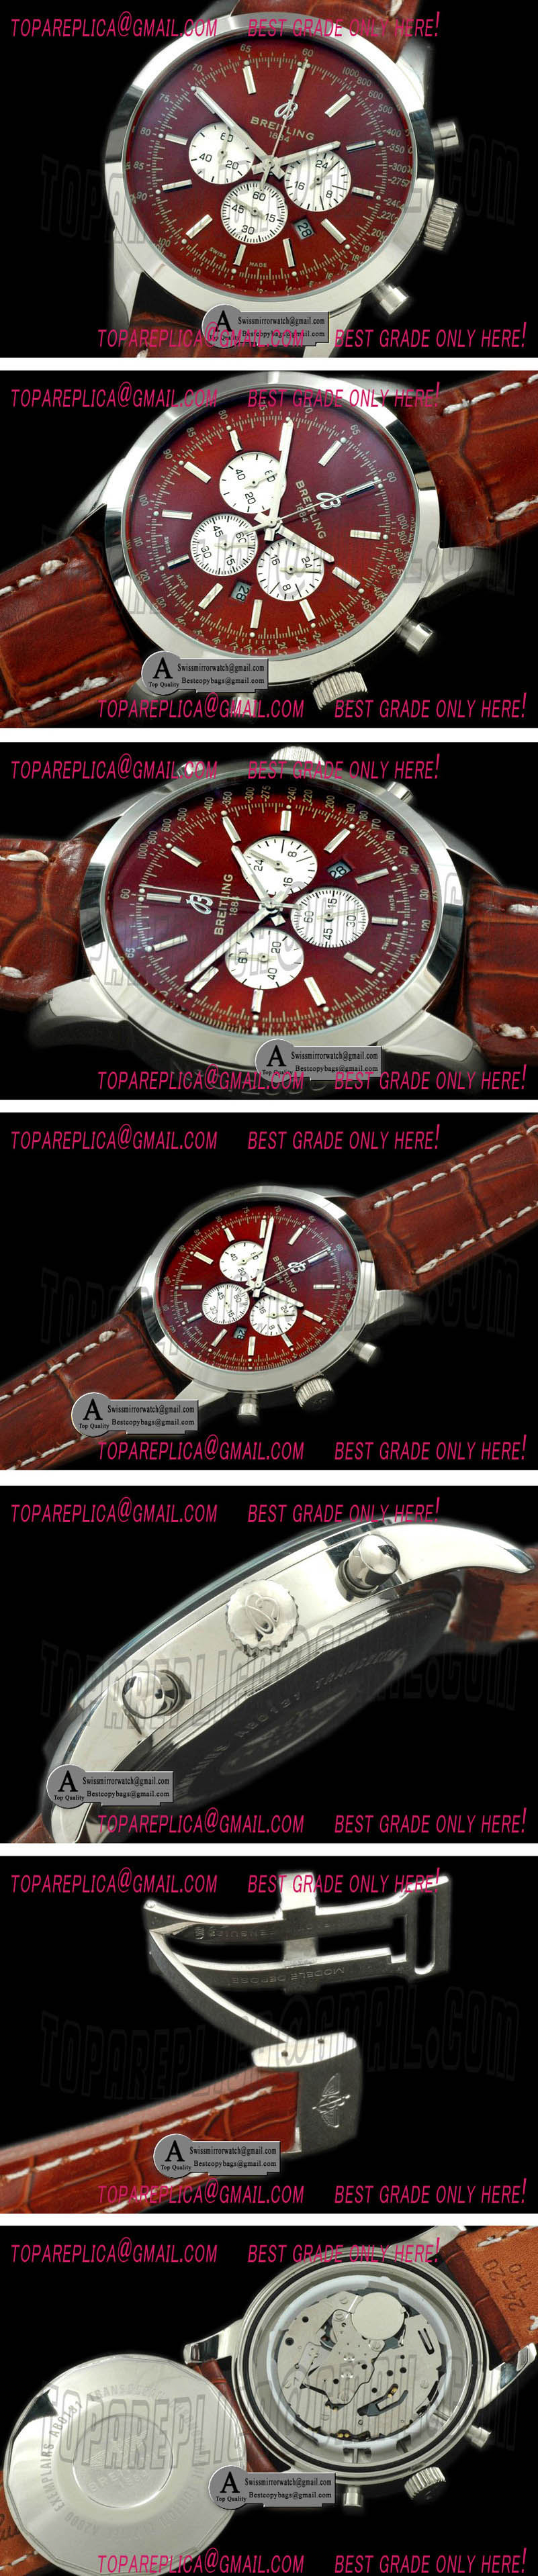 Breitling TransOcean Chrono SS/Leather Brown Jap OS20 Qtz Replica Watches